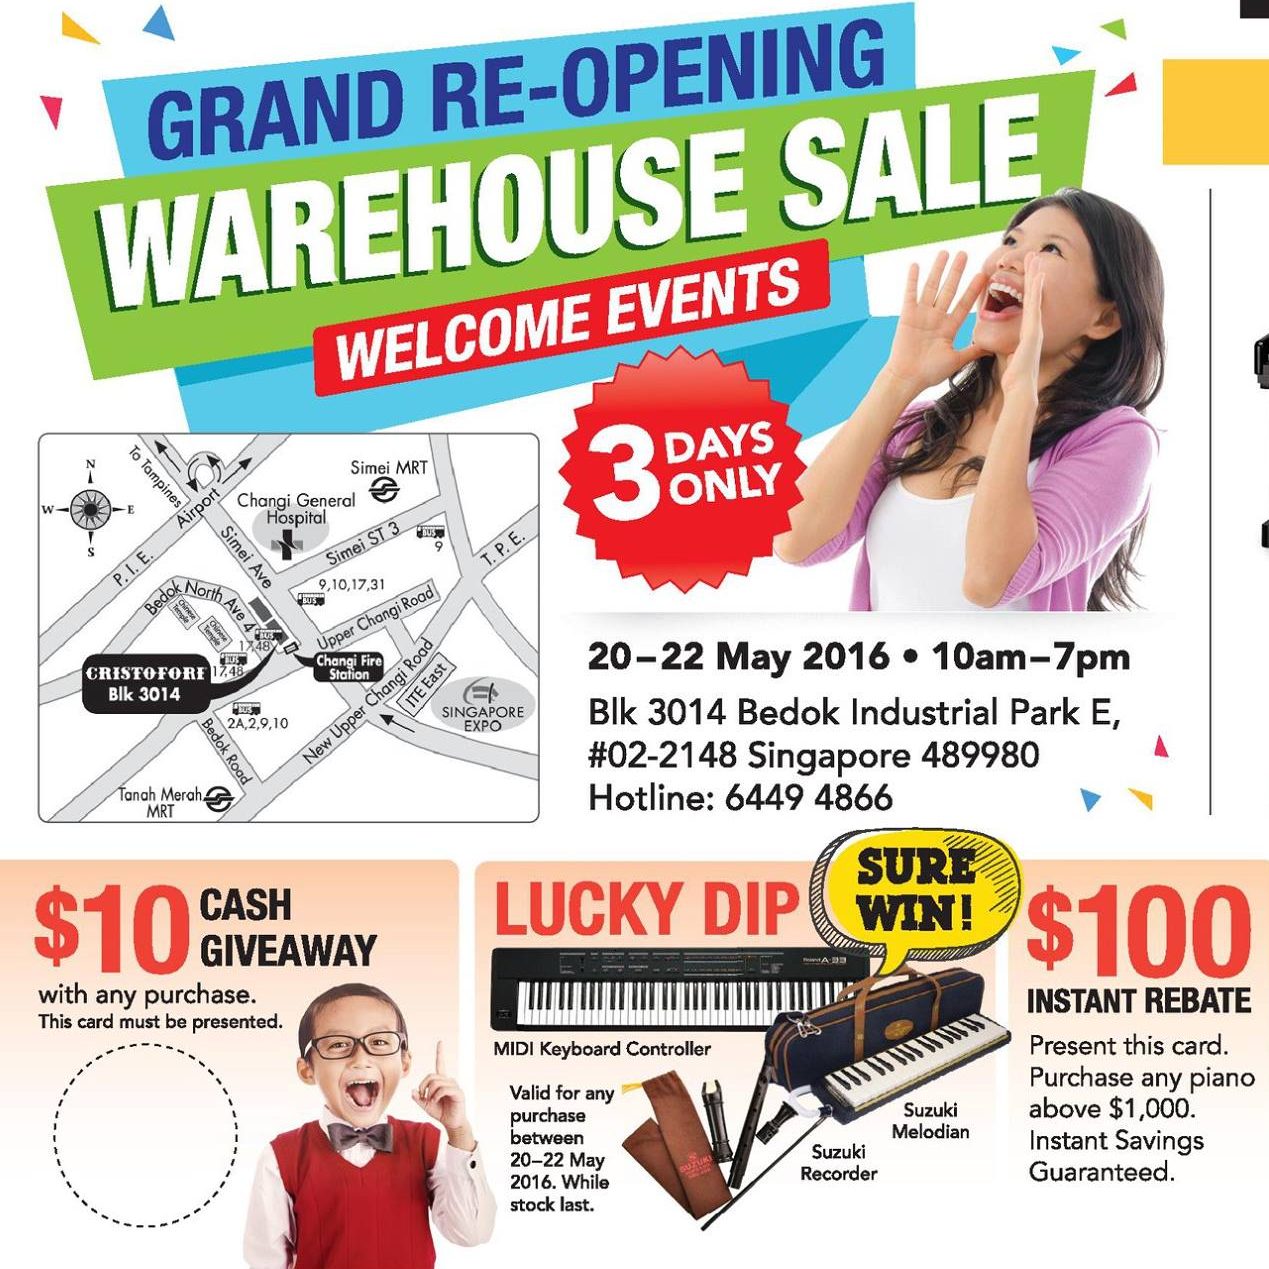 Christofori Grand Re-opening Warehouse Sale 20 to 22 May 2016